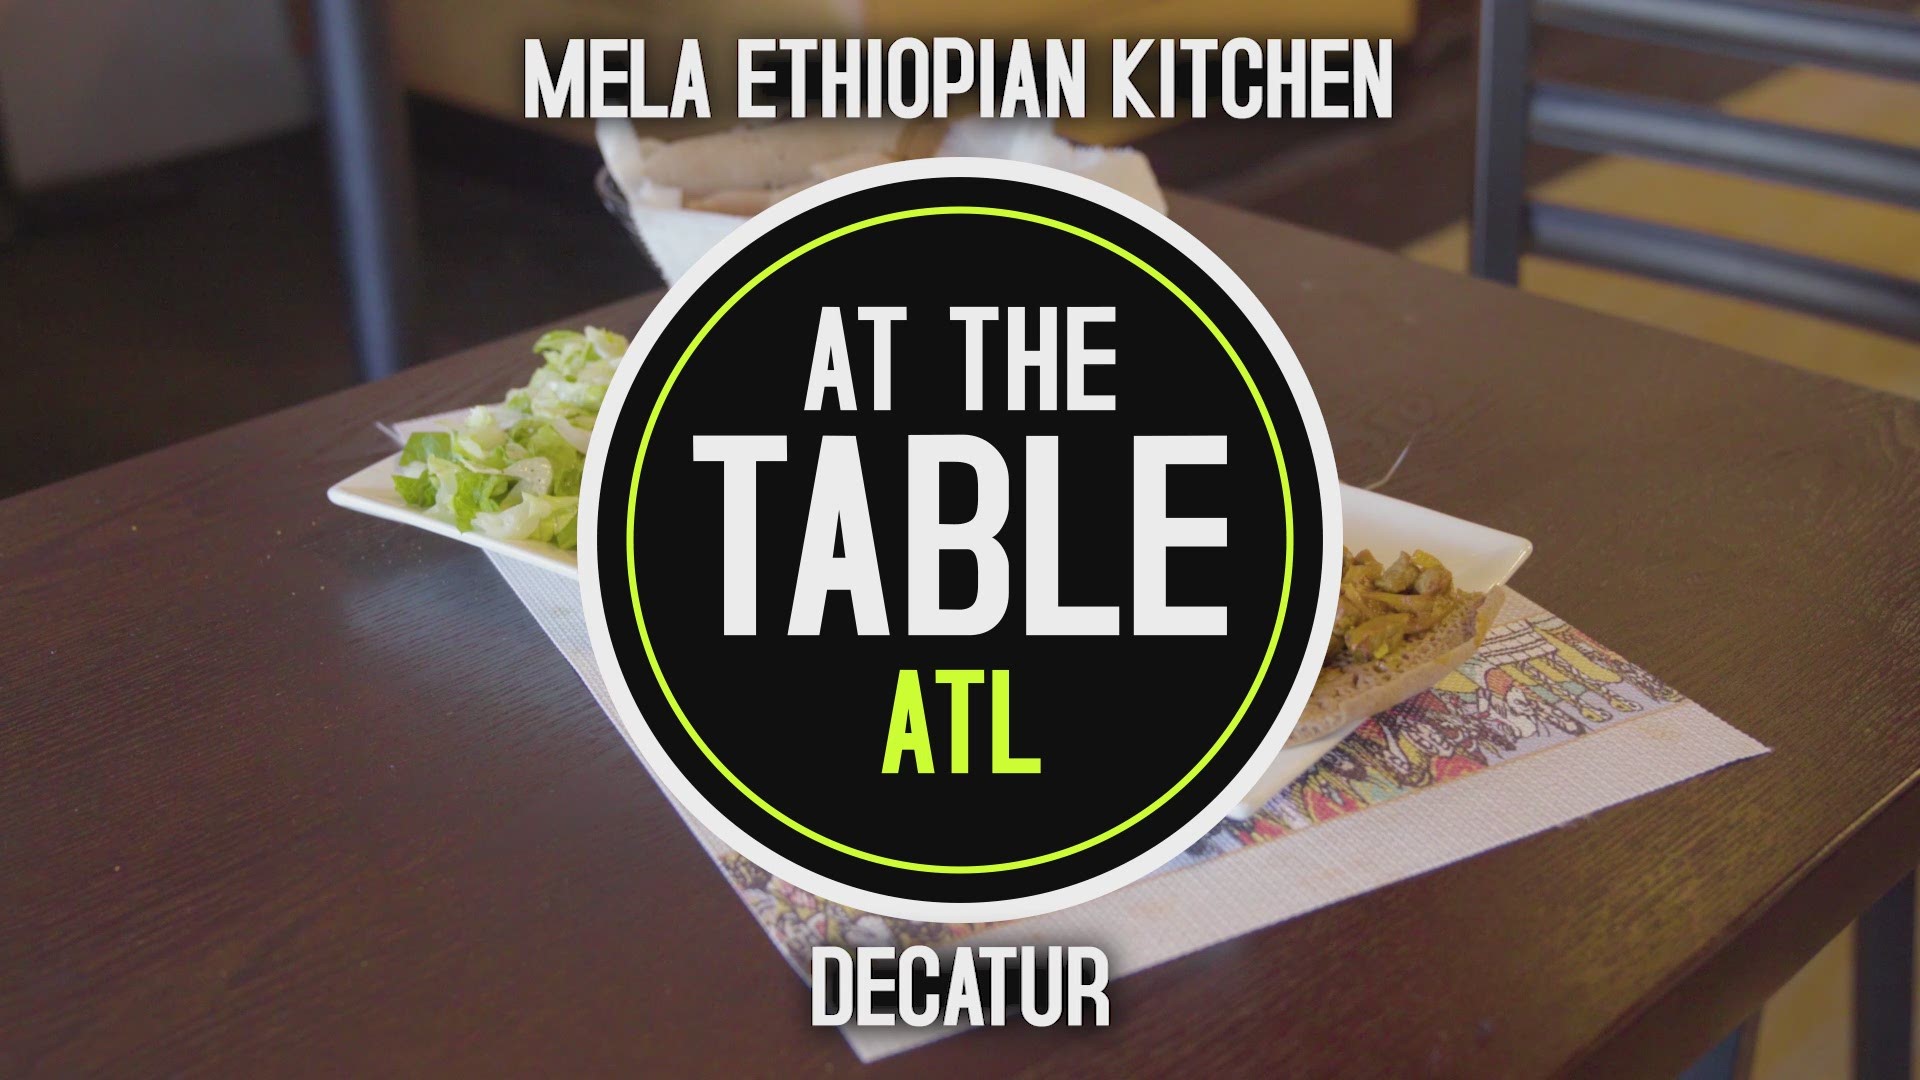 Mela, which means ‘solutions’ in Ethiopian,’ features a variety of healthy and Ethiopian dishes